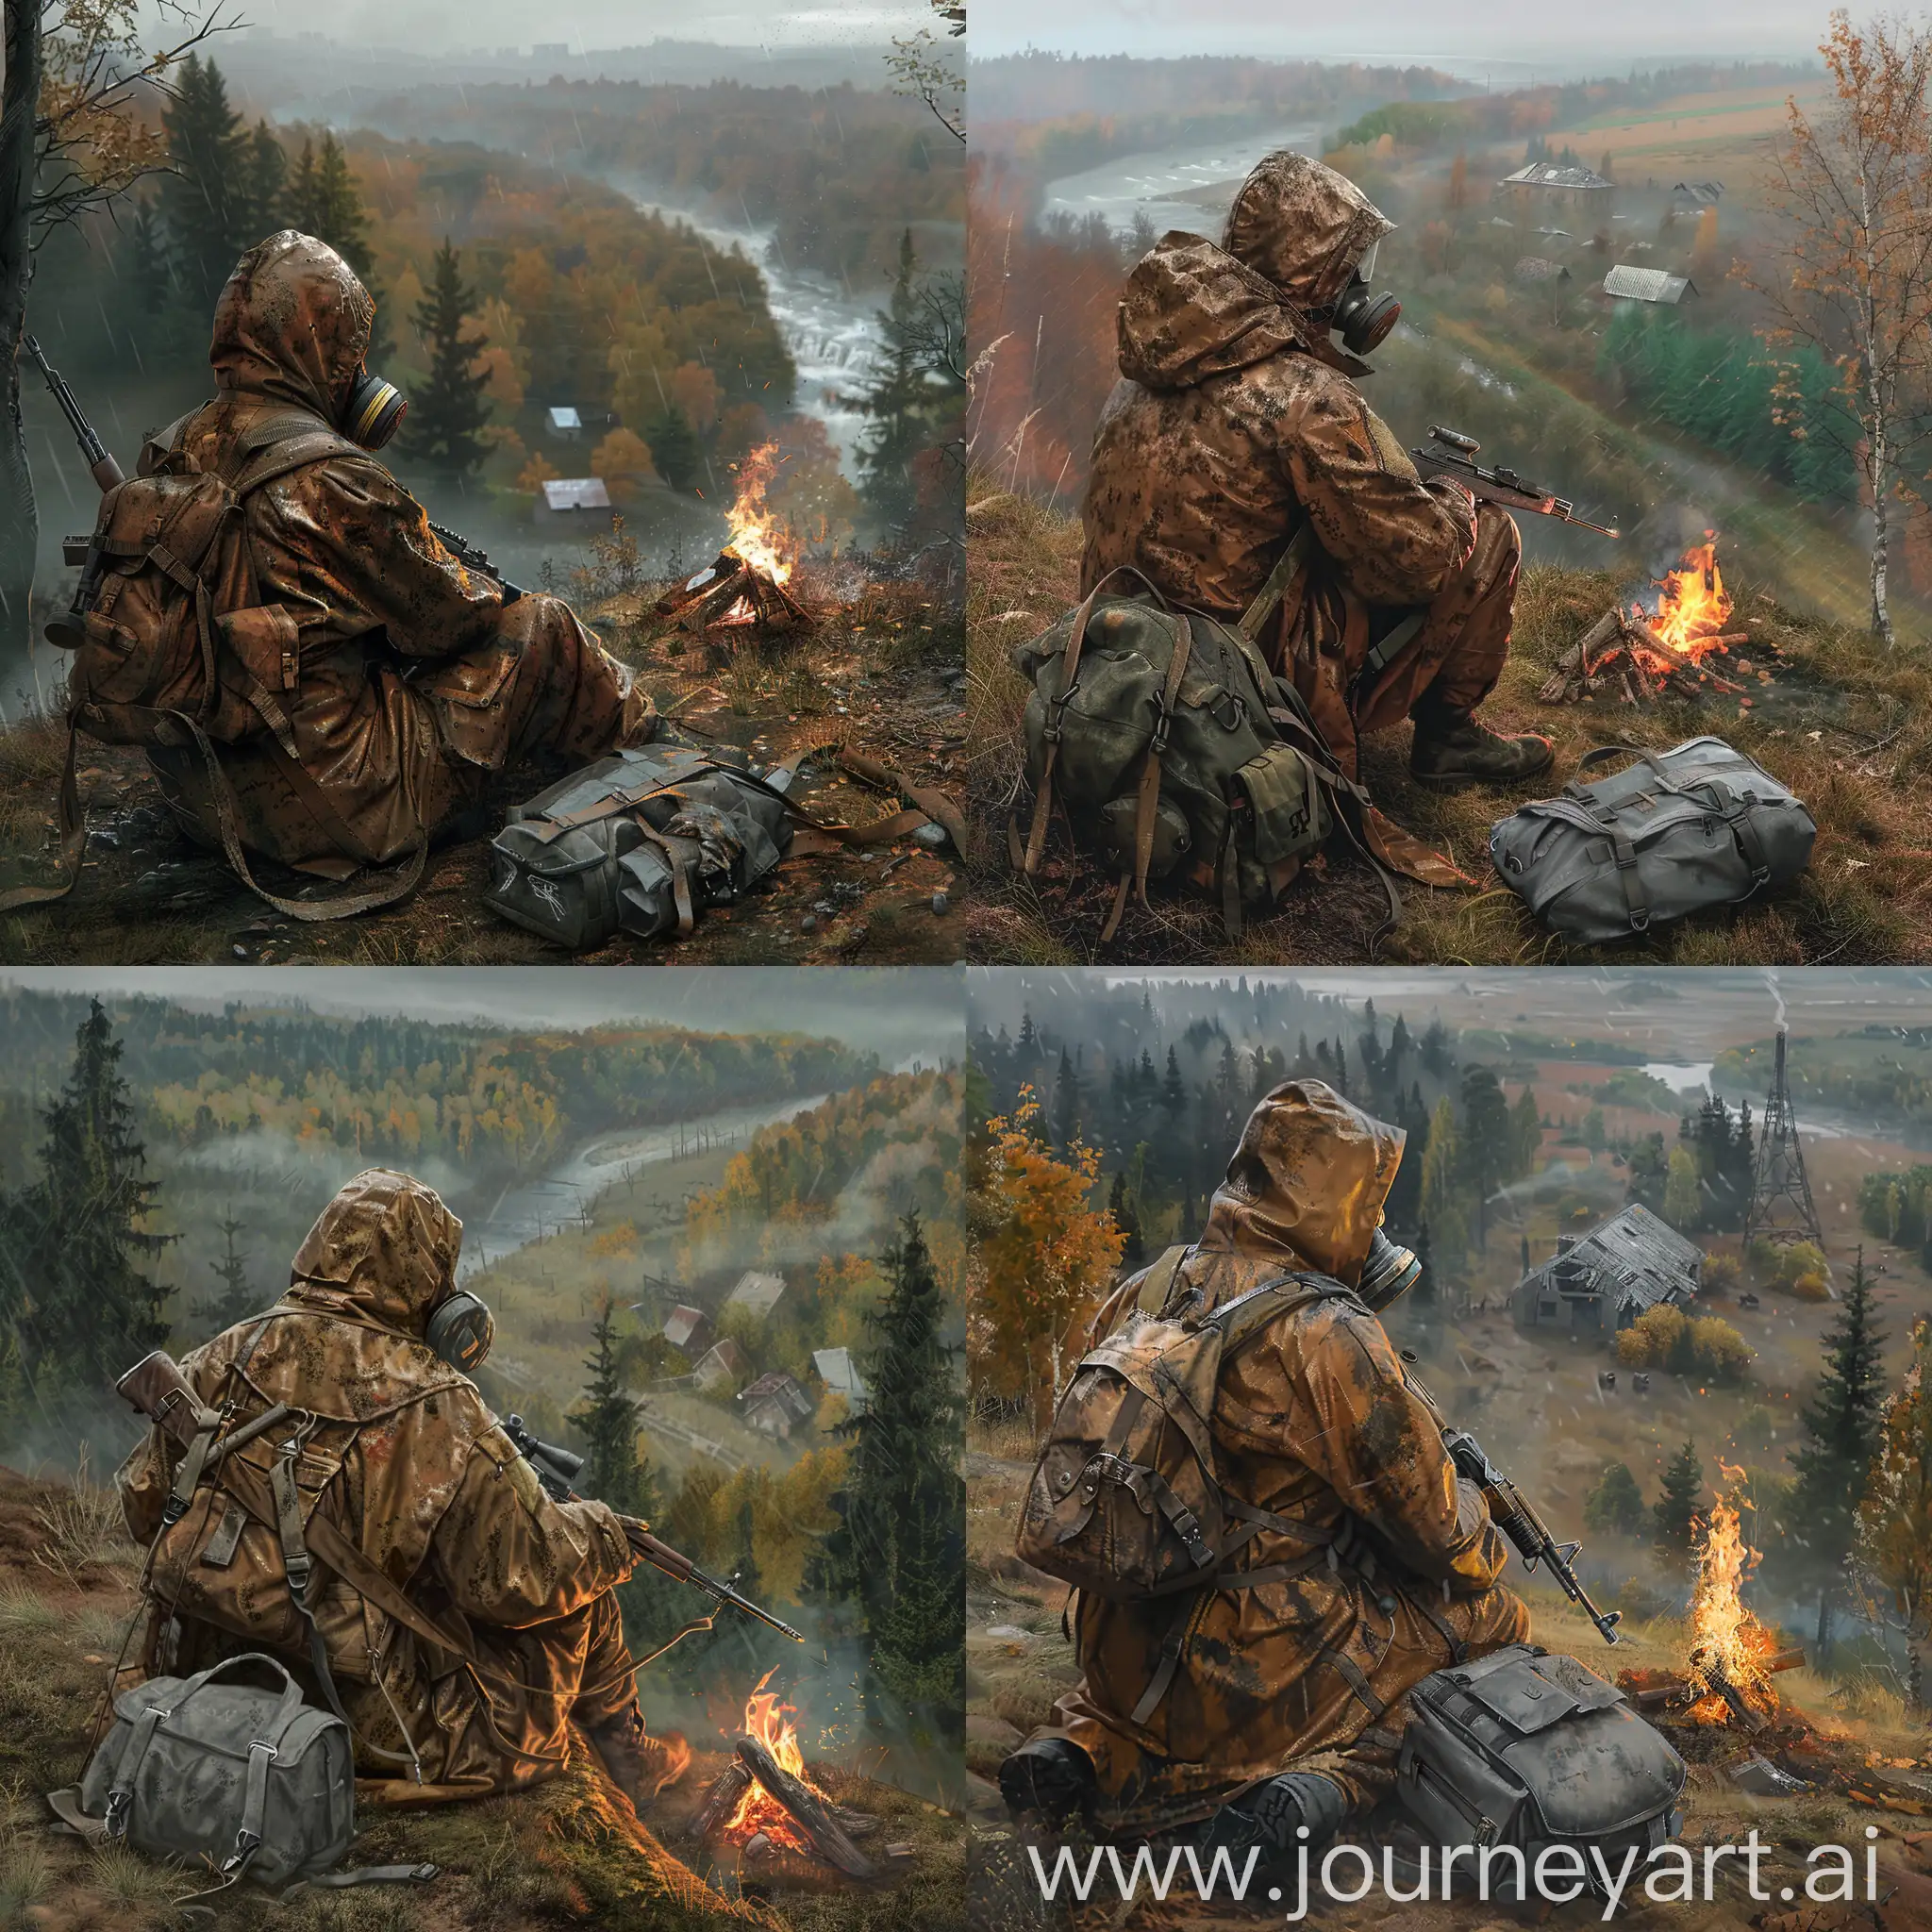 Stalker art, one stalker are sitting on a hill by a campfire, stalker is wearing a brown dirty military raincoat with military uplouding, a gasmask on his face, he has a rifle in his hands, a small gray backpack lies next to him, the weather is gloomy autumn, from the hill, where the stalkers are sitting, there is a view of the forest and an abandoned Soviet village standing in the distance.